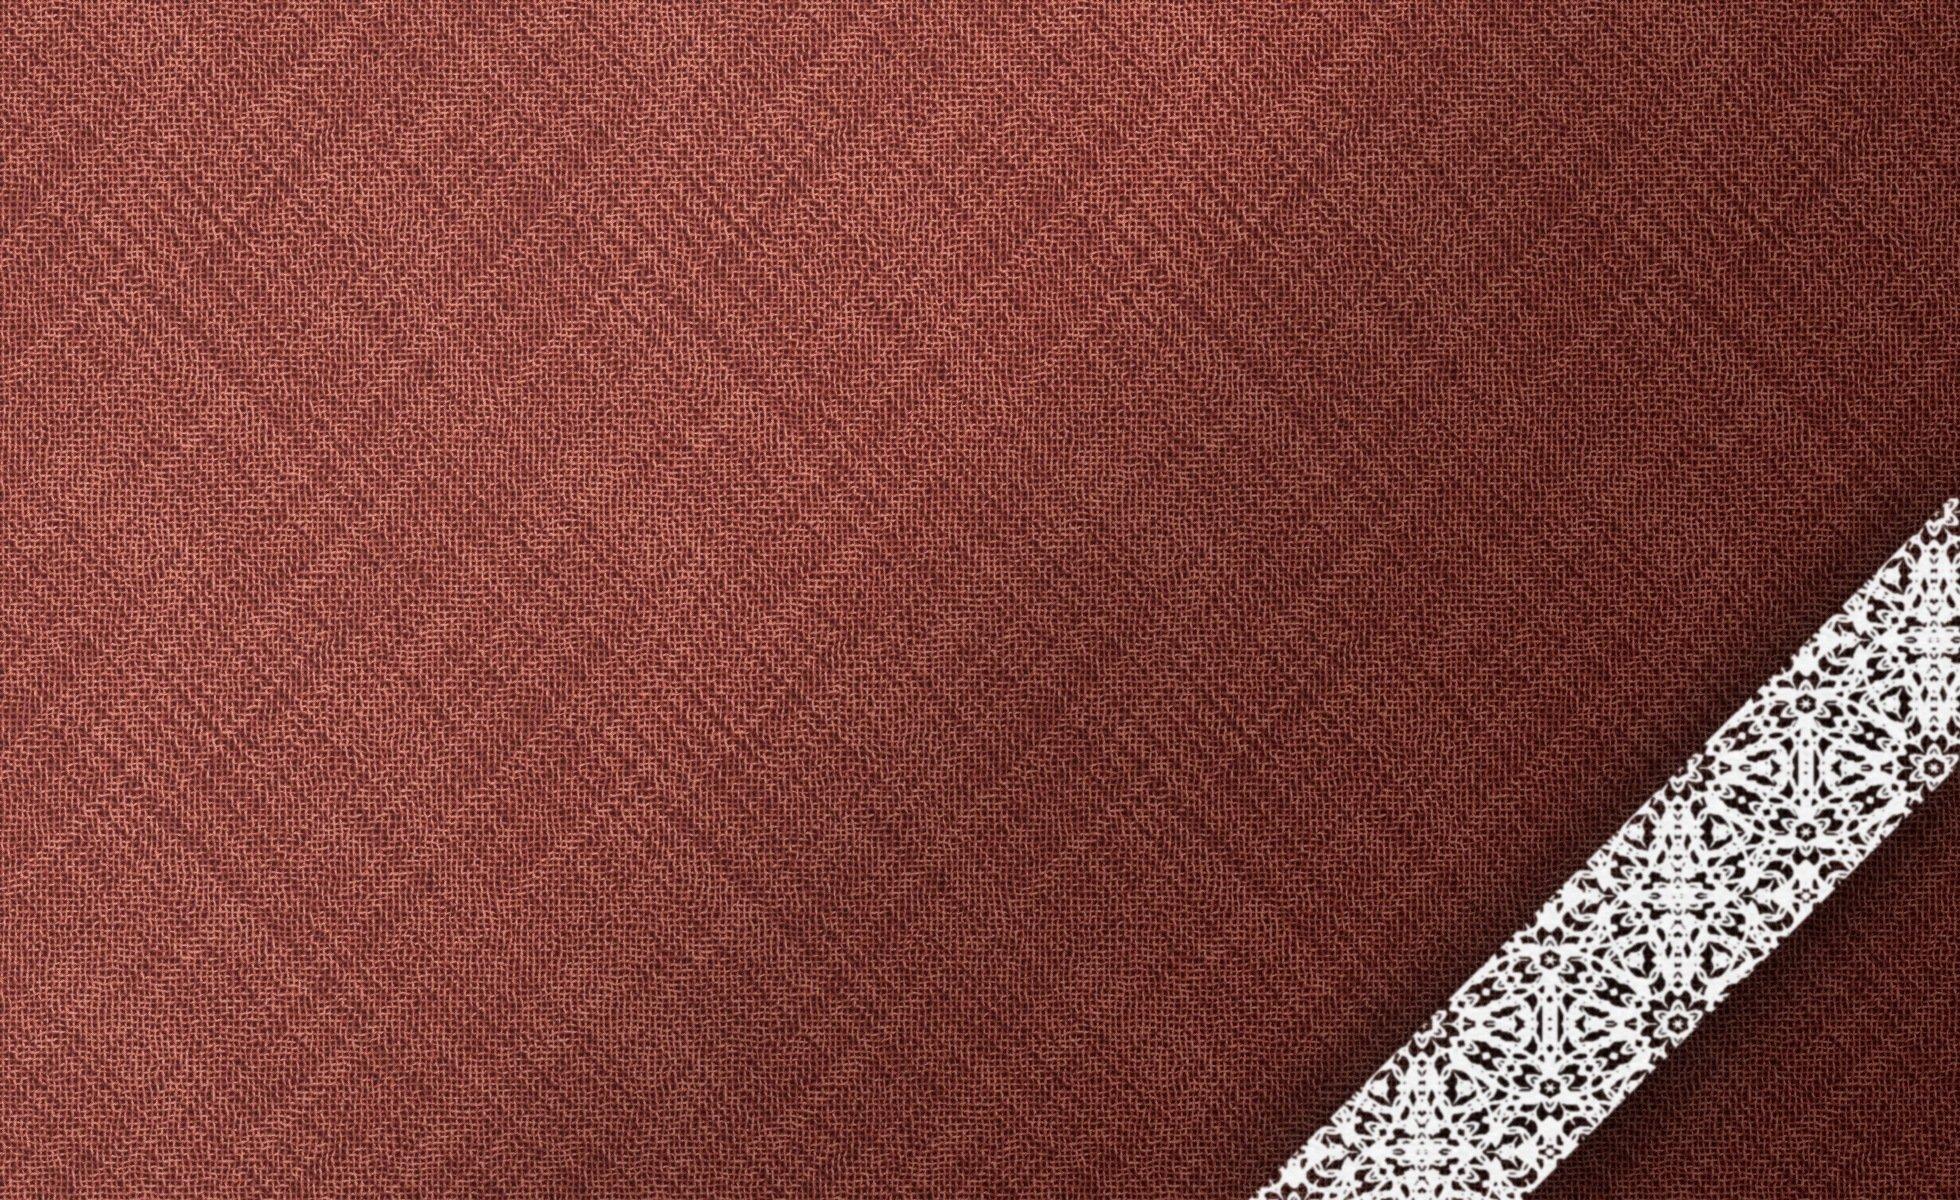 textures background cloth burgundy brown white lace HD wallpaper